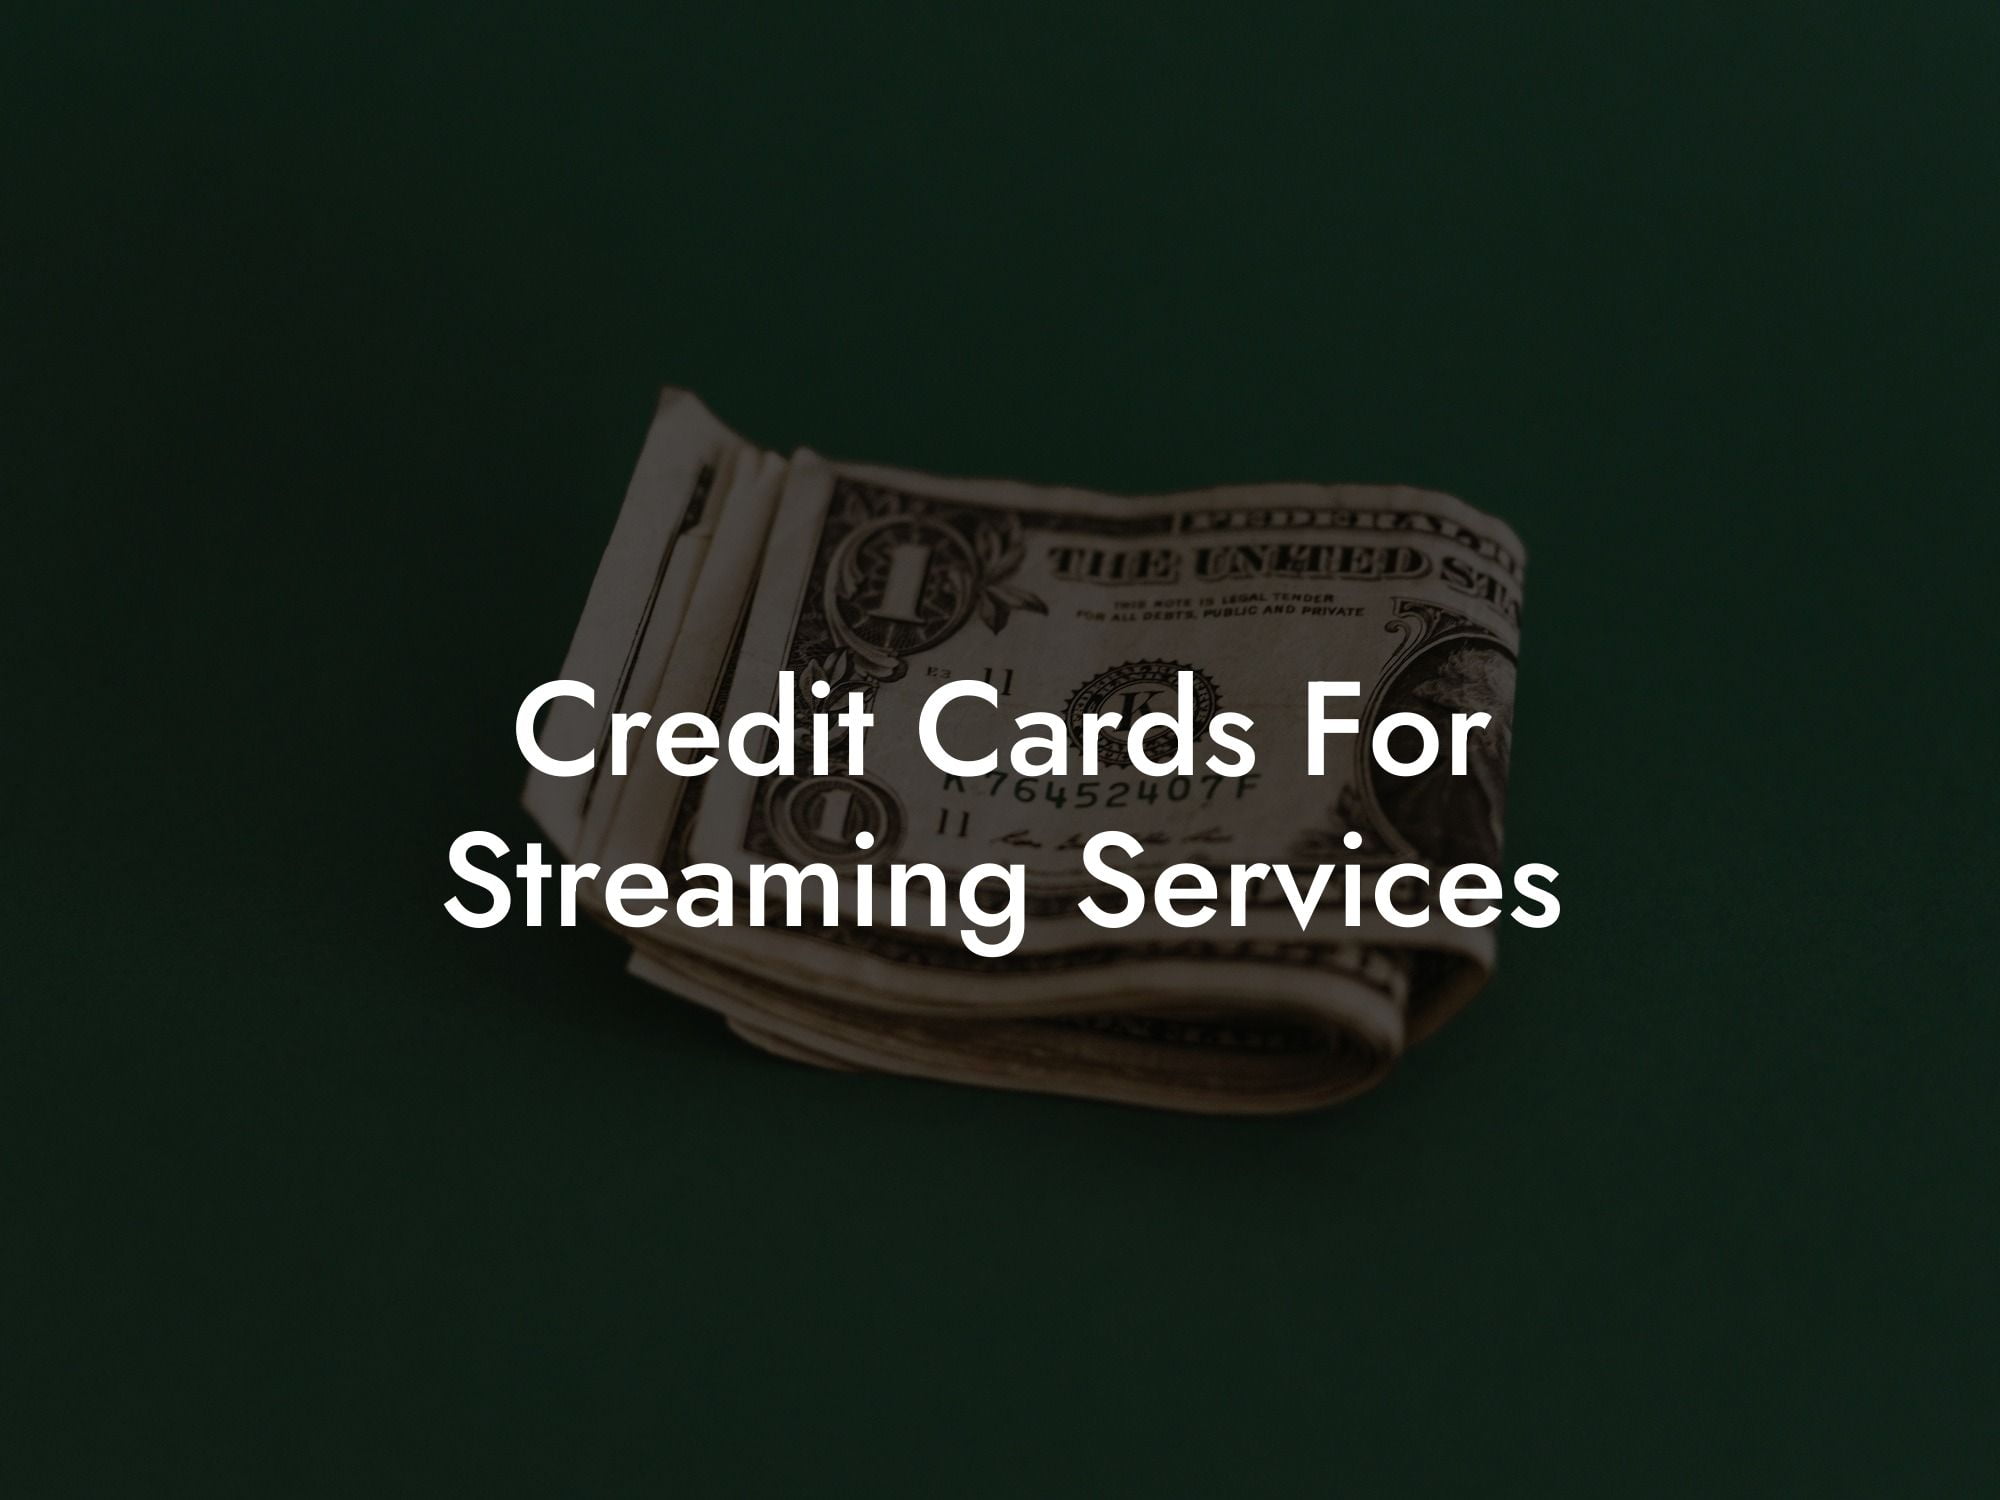 Credit Cards For Streaming Services